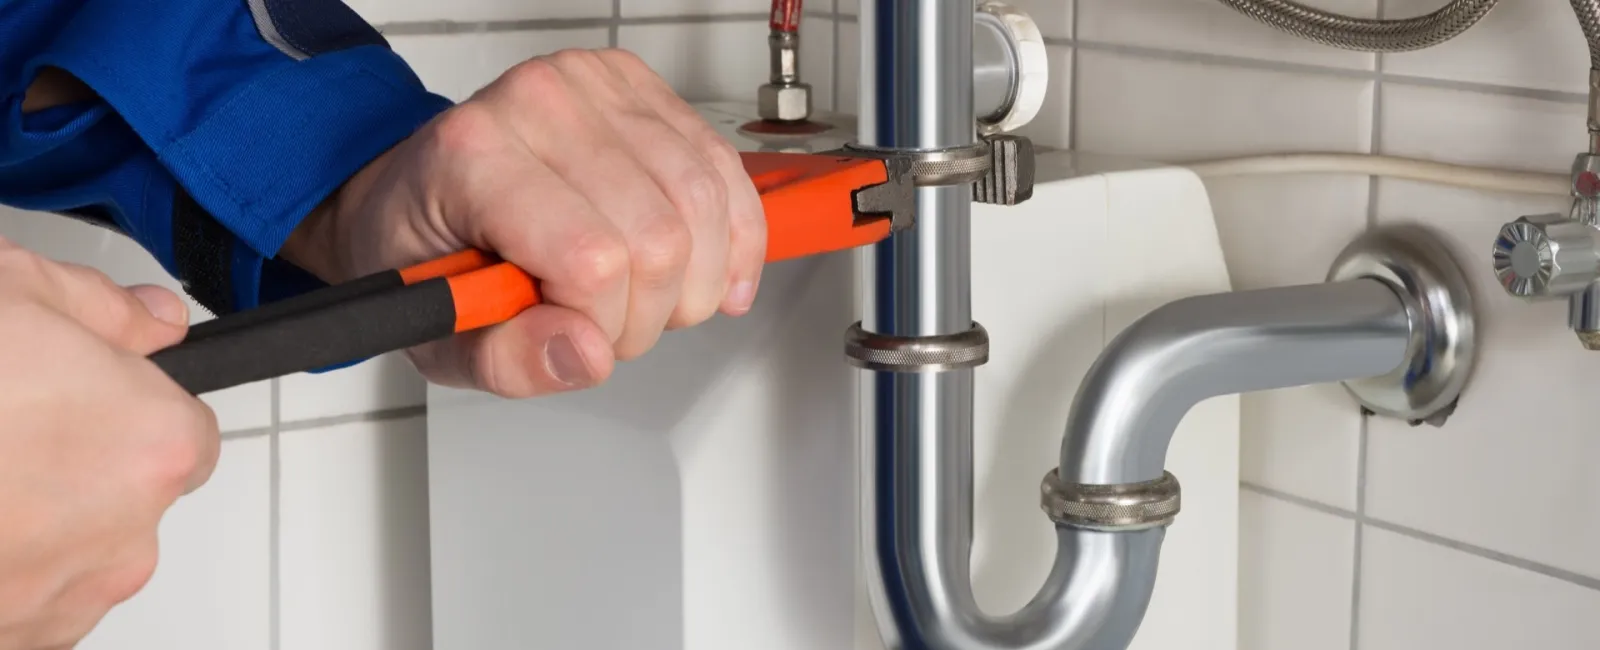 Buying a house? Don’t forget a home plumbing inspection